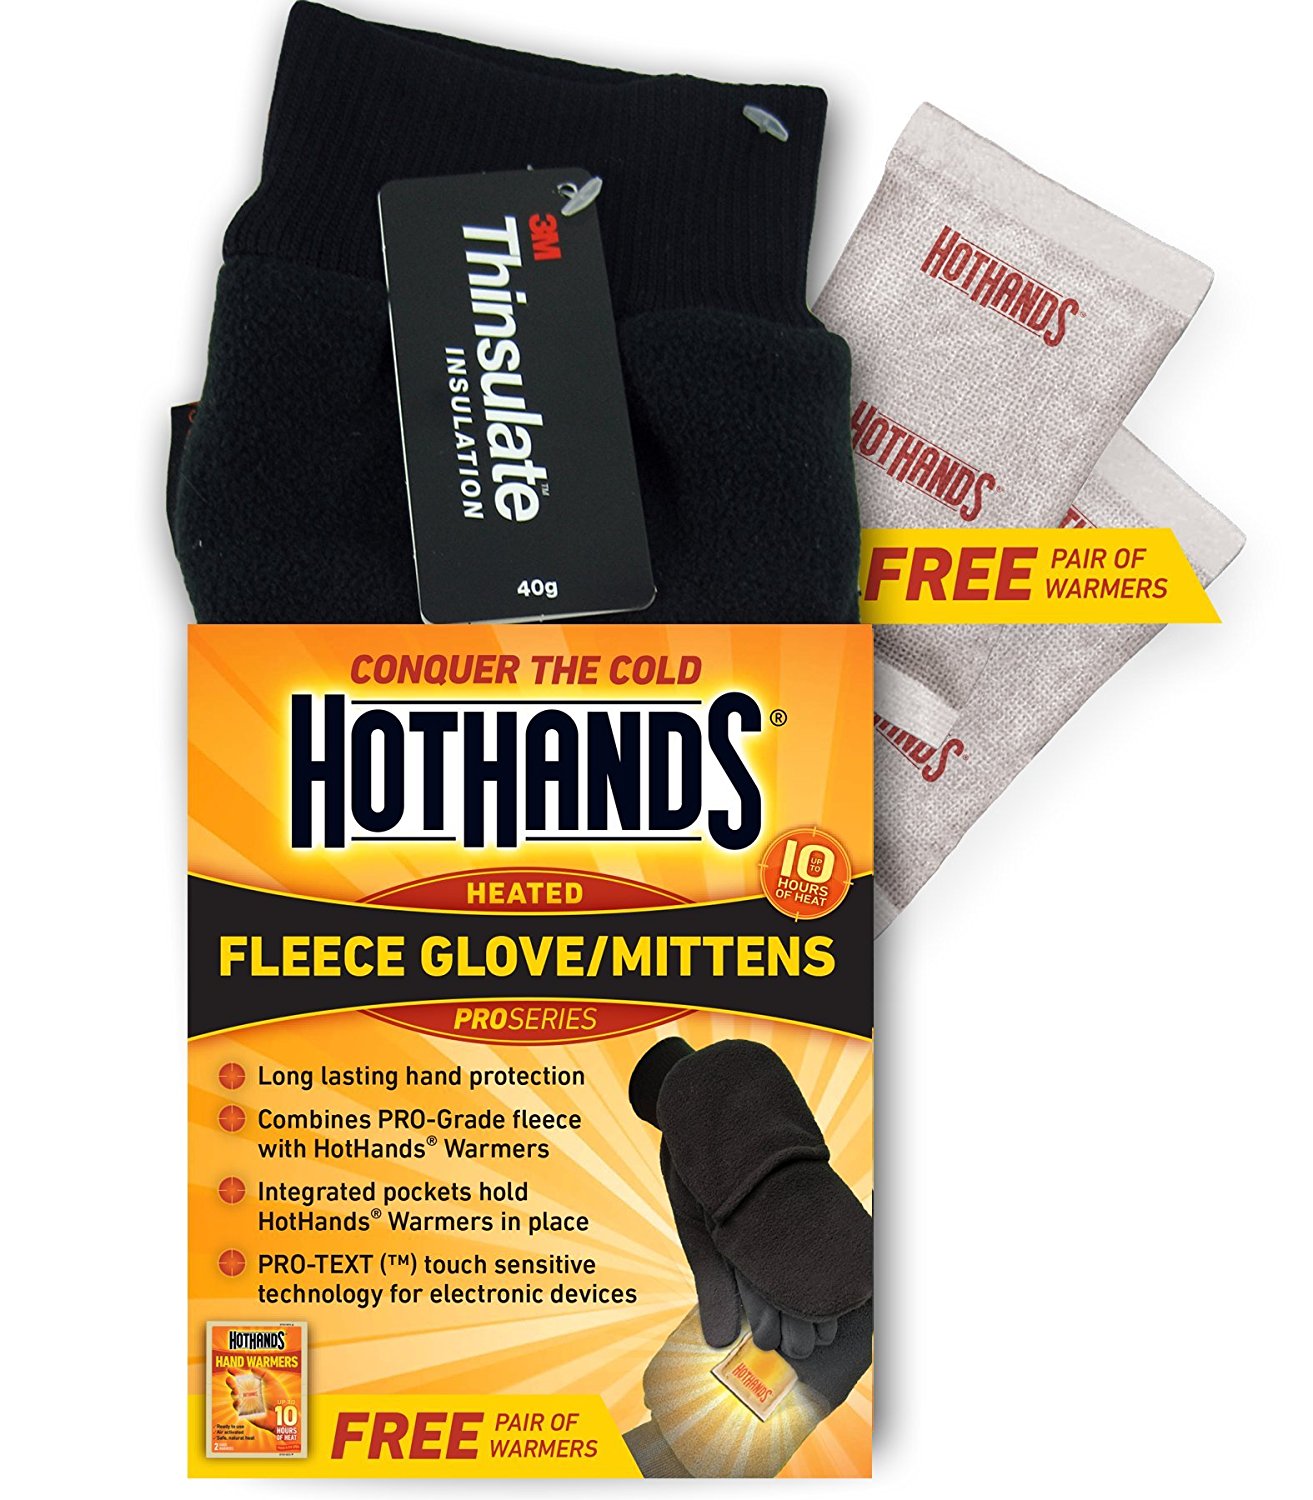 Hothands Hand & Foot Warmers Pocket Glove in 1 2 5 10 20 Pack **FREE UK POST** 